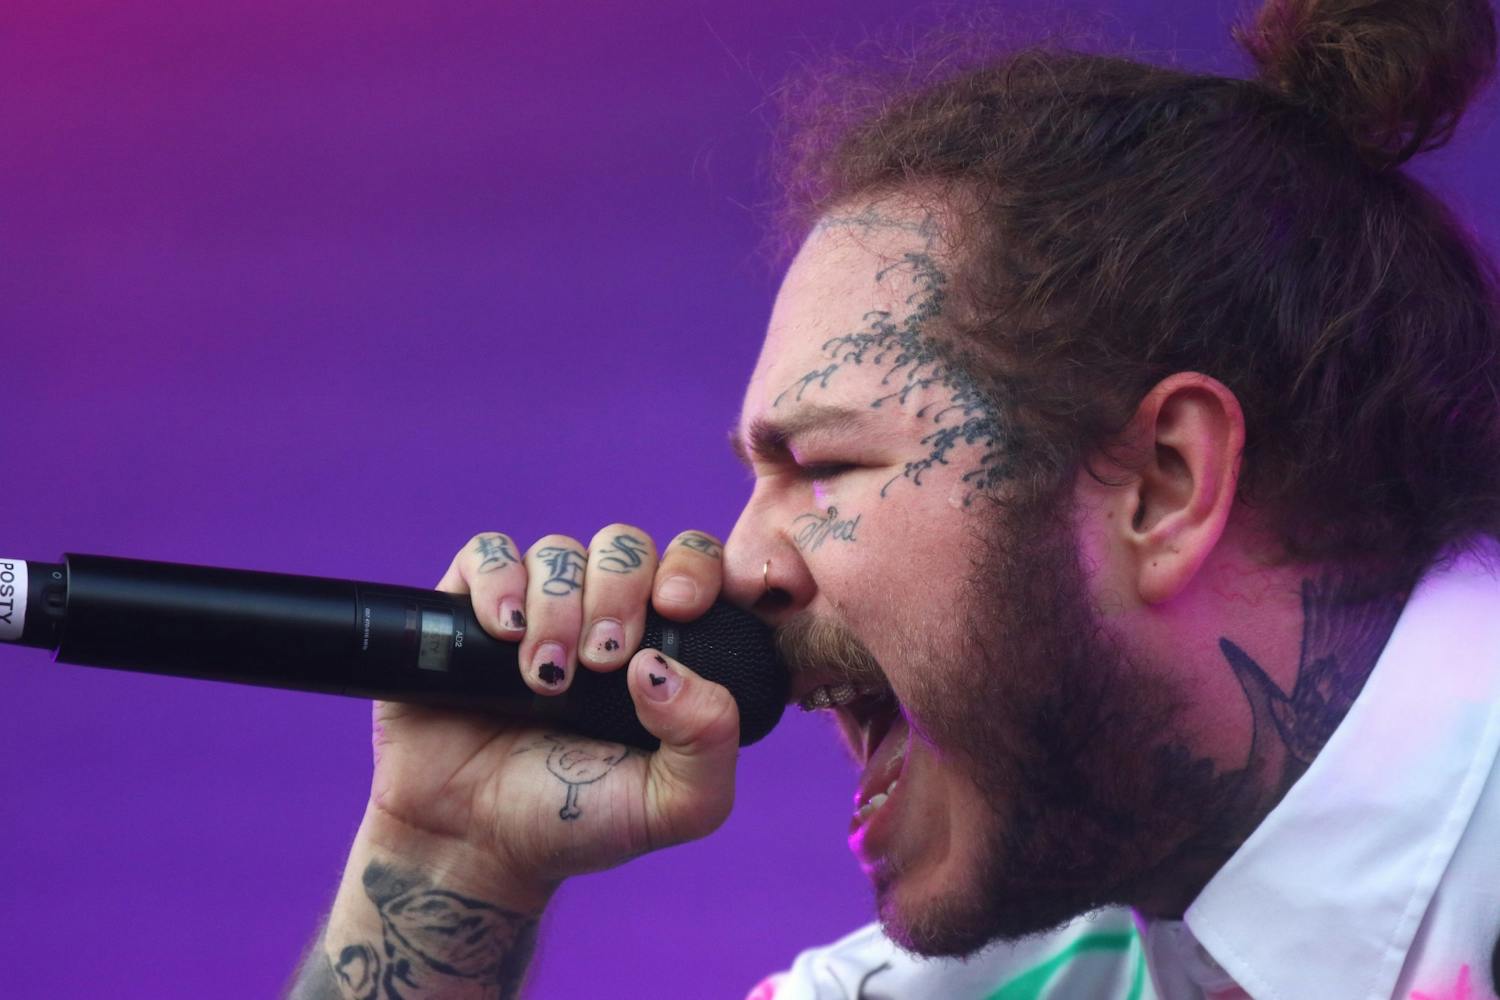 Post Malone performs on the Bud Light Stage during the Lollapalooza festival on Aug. 3, 2018, in Chicago.